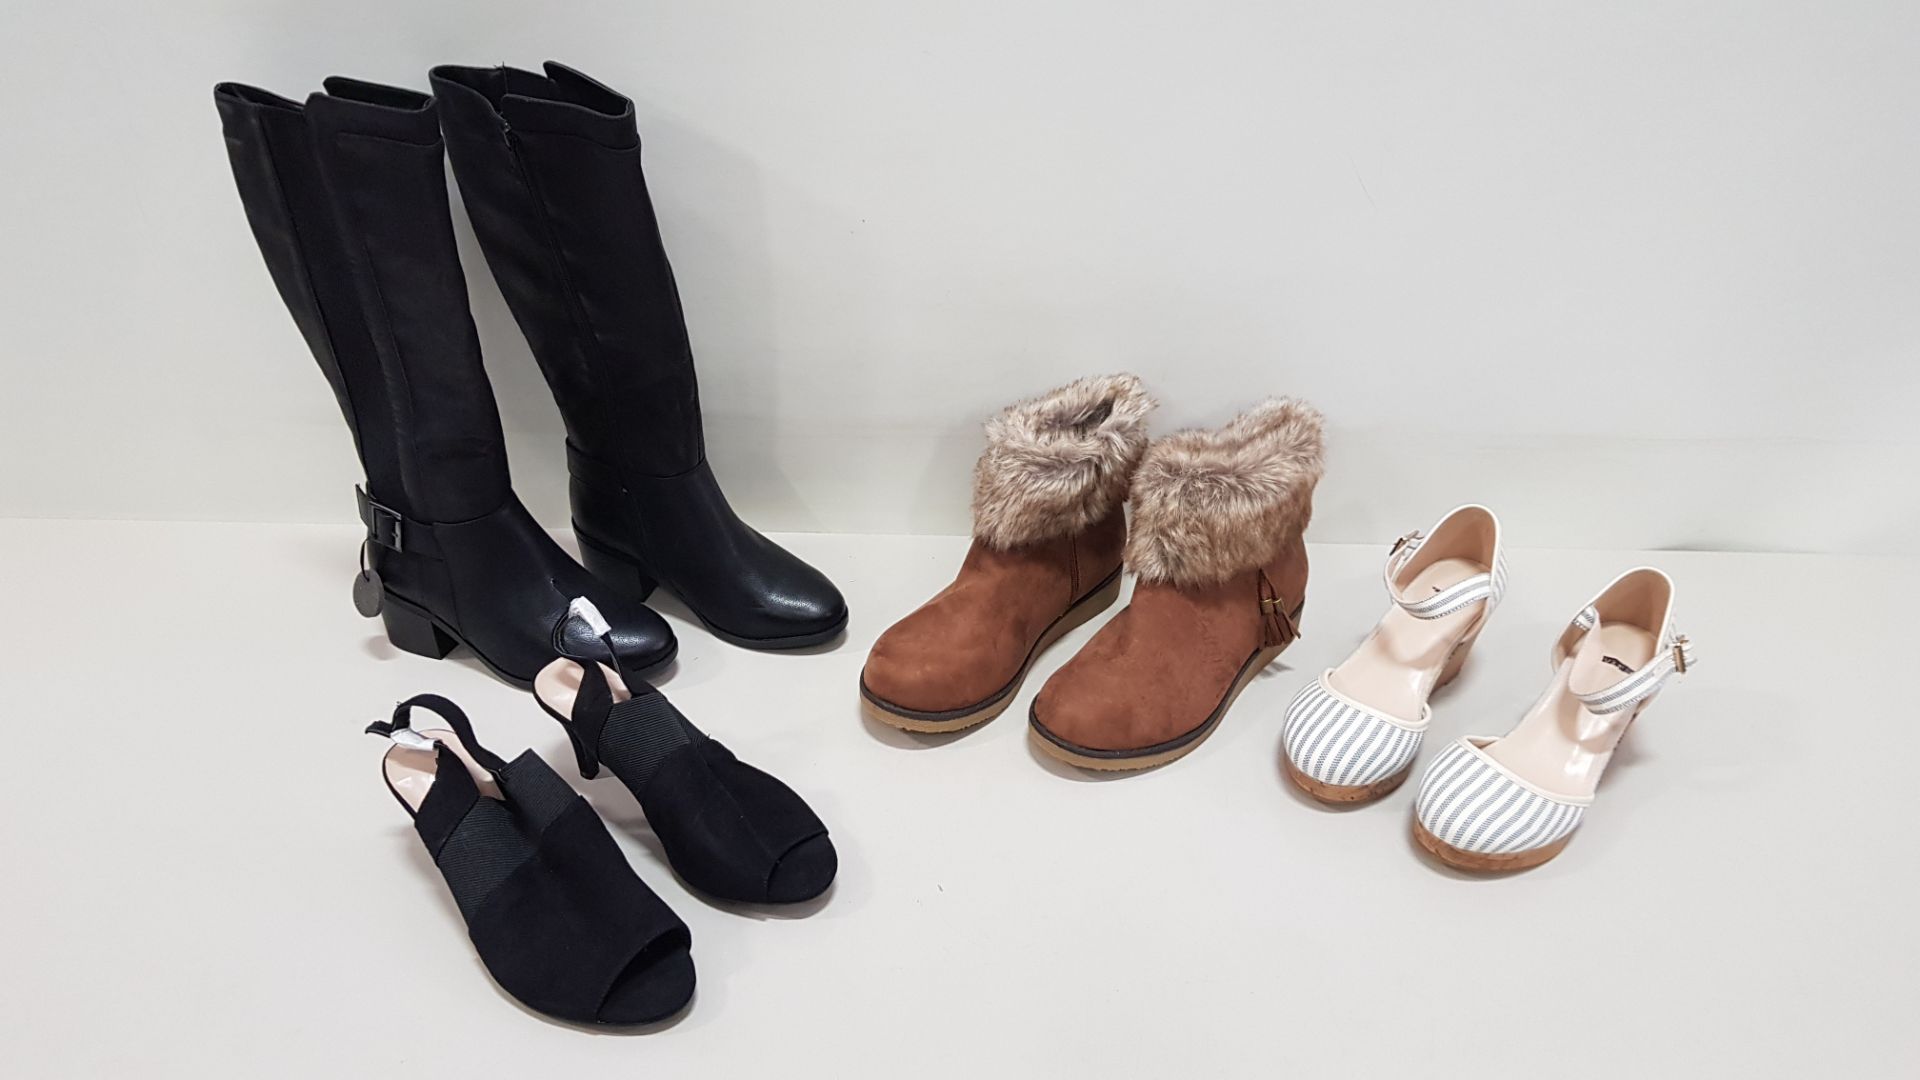 12 PIECE MIXED TOPSHOP SHOE LOT CONTAINING WIDE FIT HEELED SHOES, FAUX FUR BOOTS, SILVER HEELED